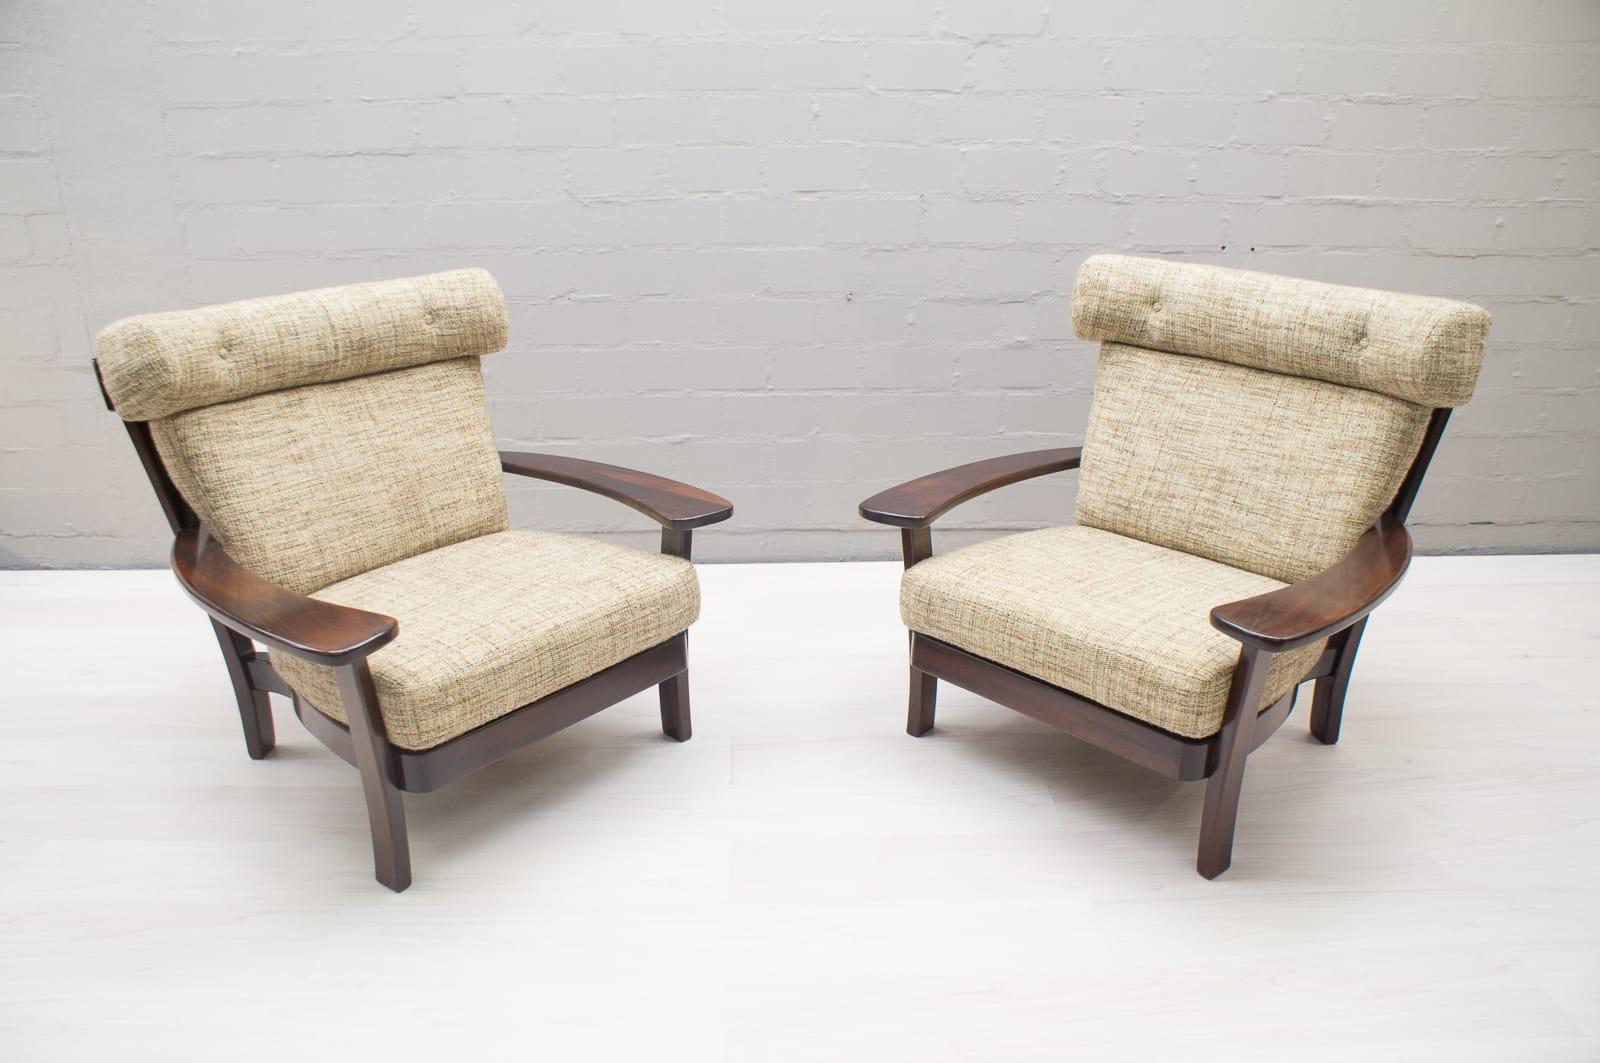 Armchairs, rosewood, Brazilian design, European execution, 1960s. The sofa set is still in the original upholstery fabric. Altogether a very good condition.

This settee is executed in Brazilian rosewood and velvet and holds several